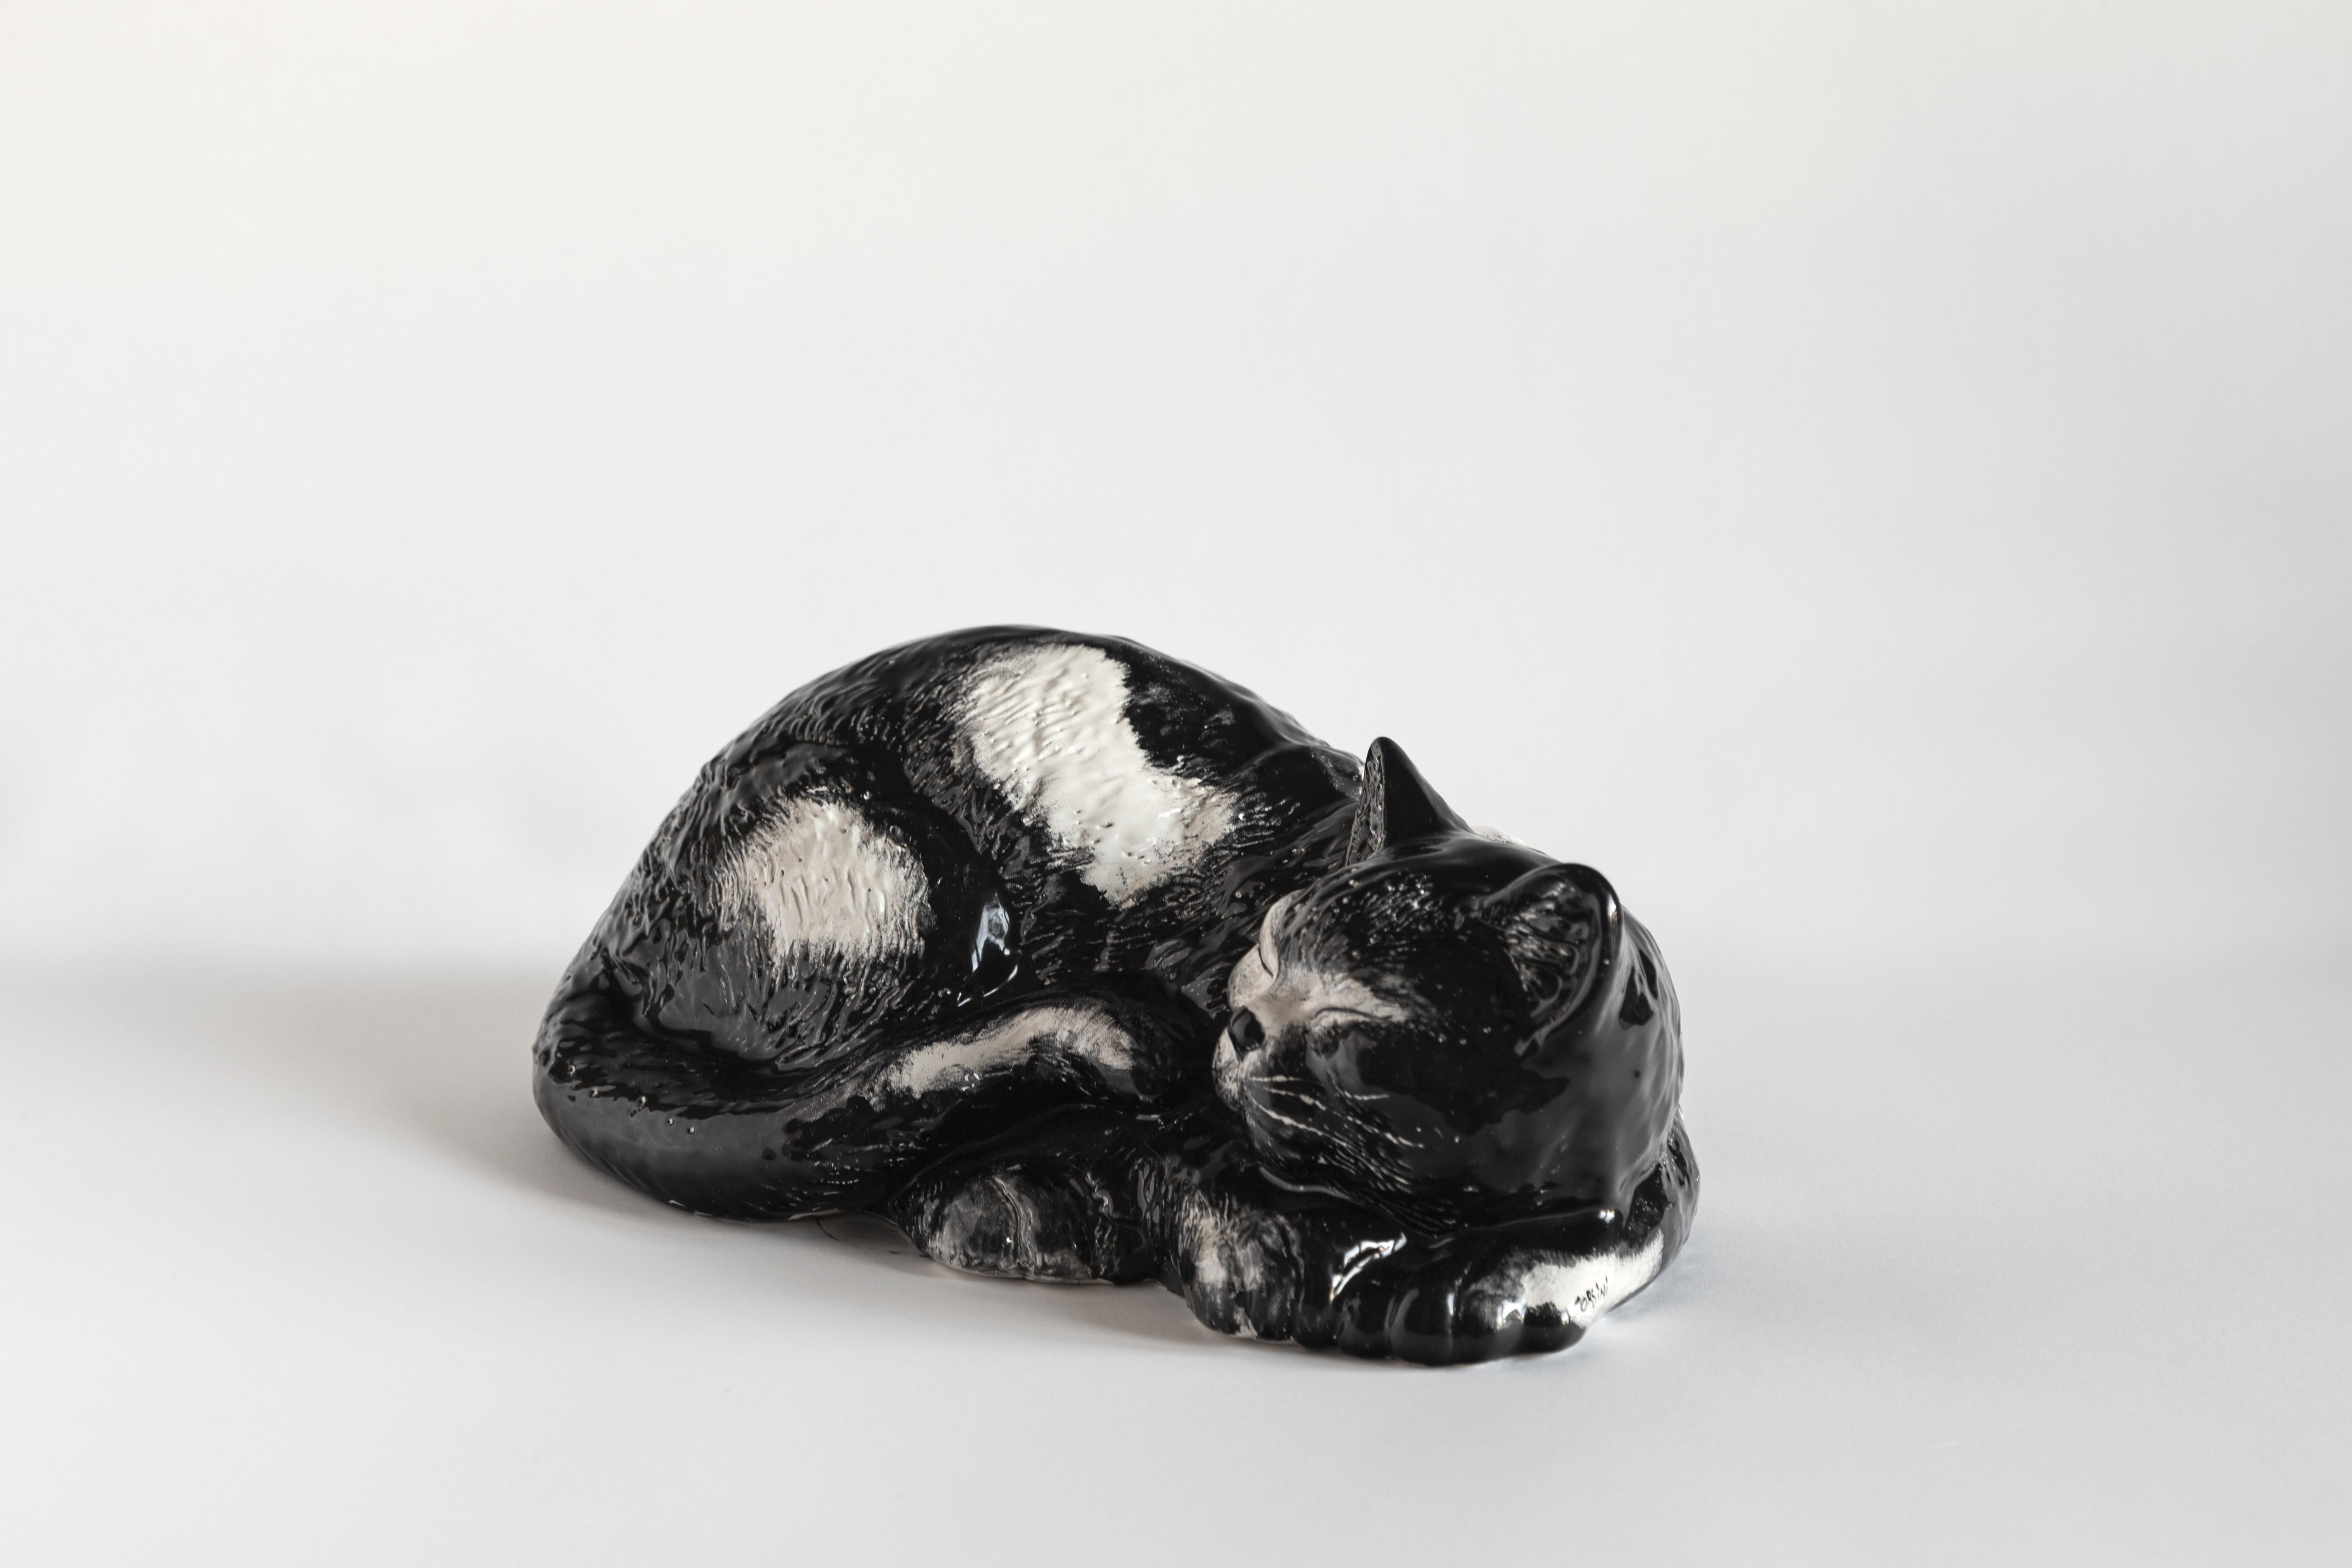 This Italian porcelain sculpture is part of Grand Tour by Vito Nesta. Made of Capodimonte porcelain with a glossy finish, this sculpture is shaped like a sleeping cat and was inspired by Romolo, Vito's cat.